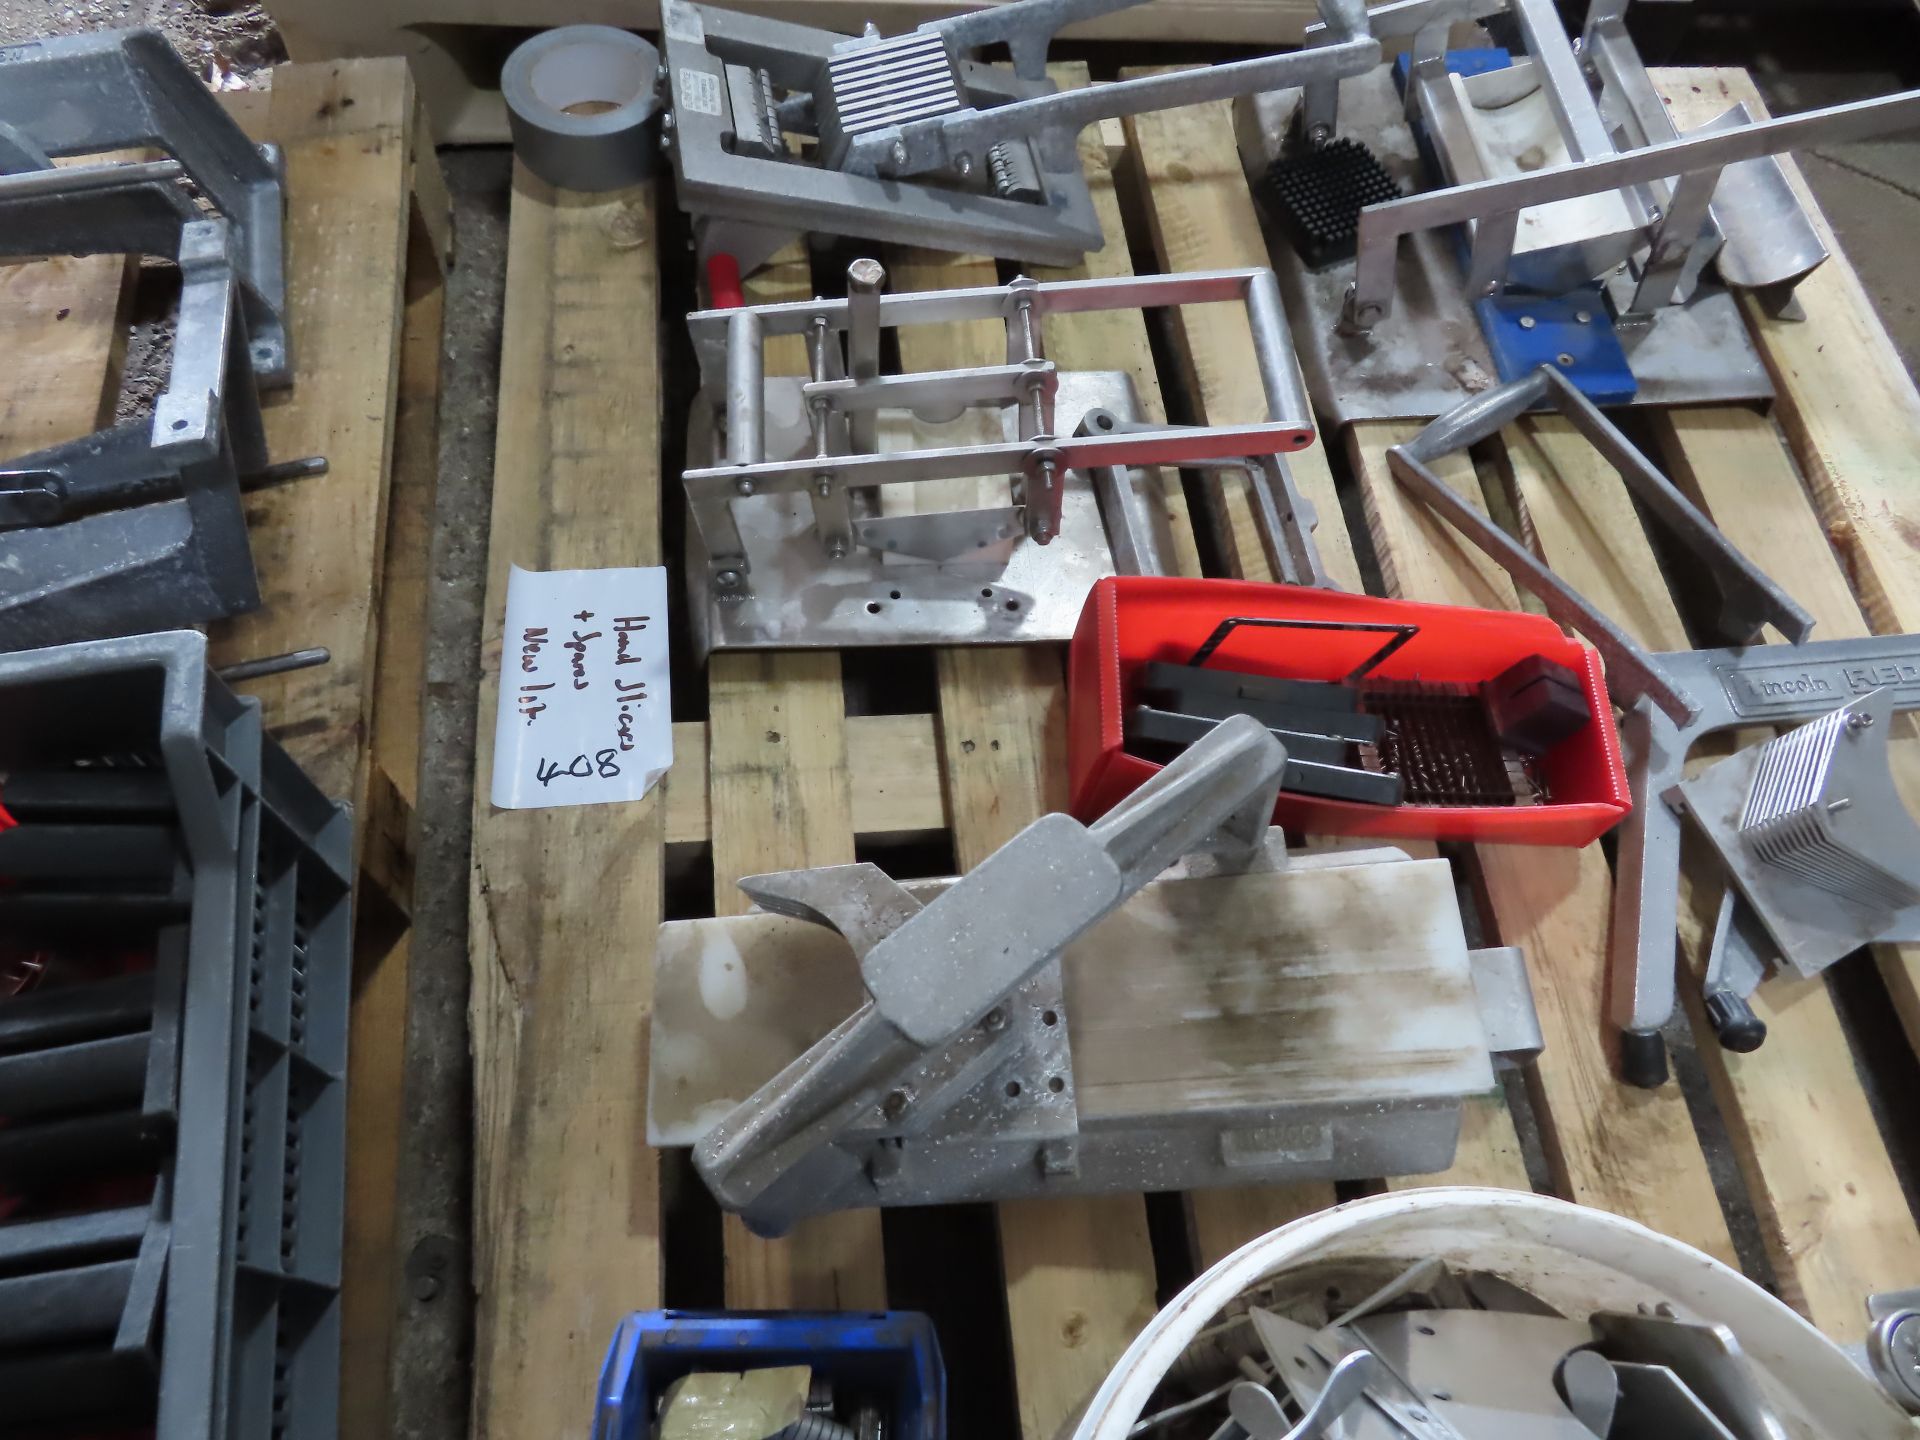 2 X PALLETS OF HAND SLICING/WEDGING MACHINES WITH SPARES. - Image 3 of 4